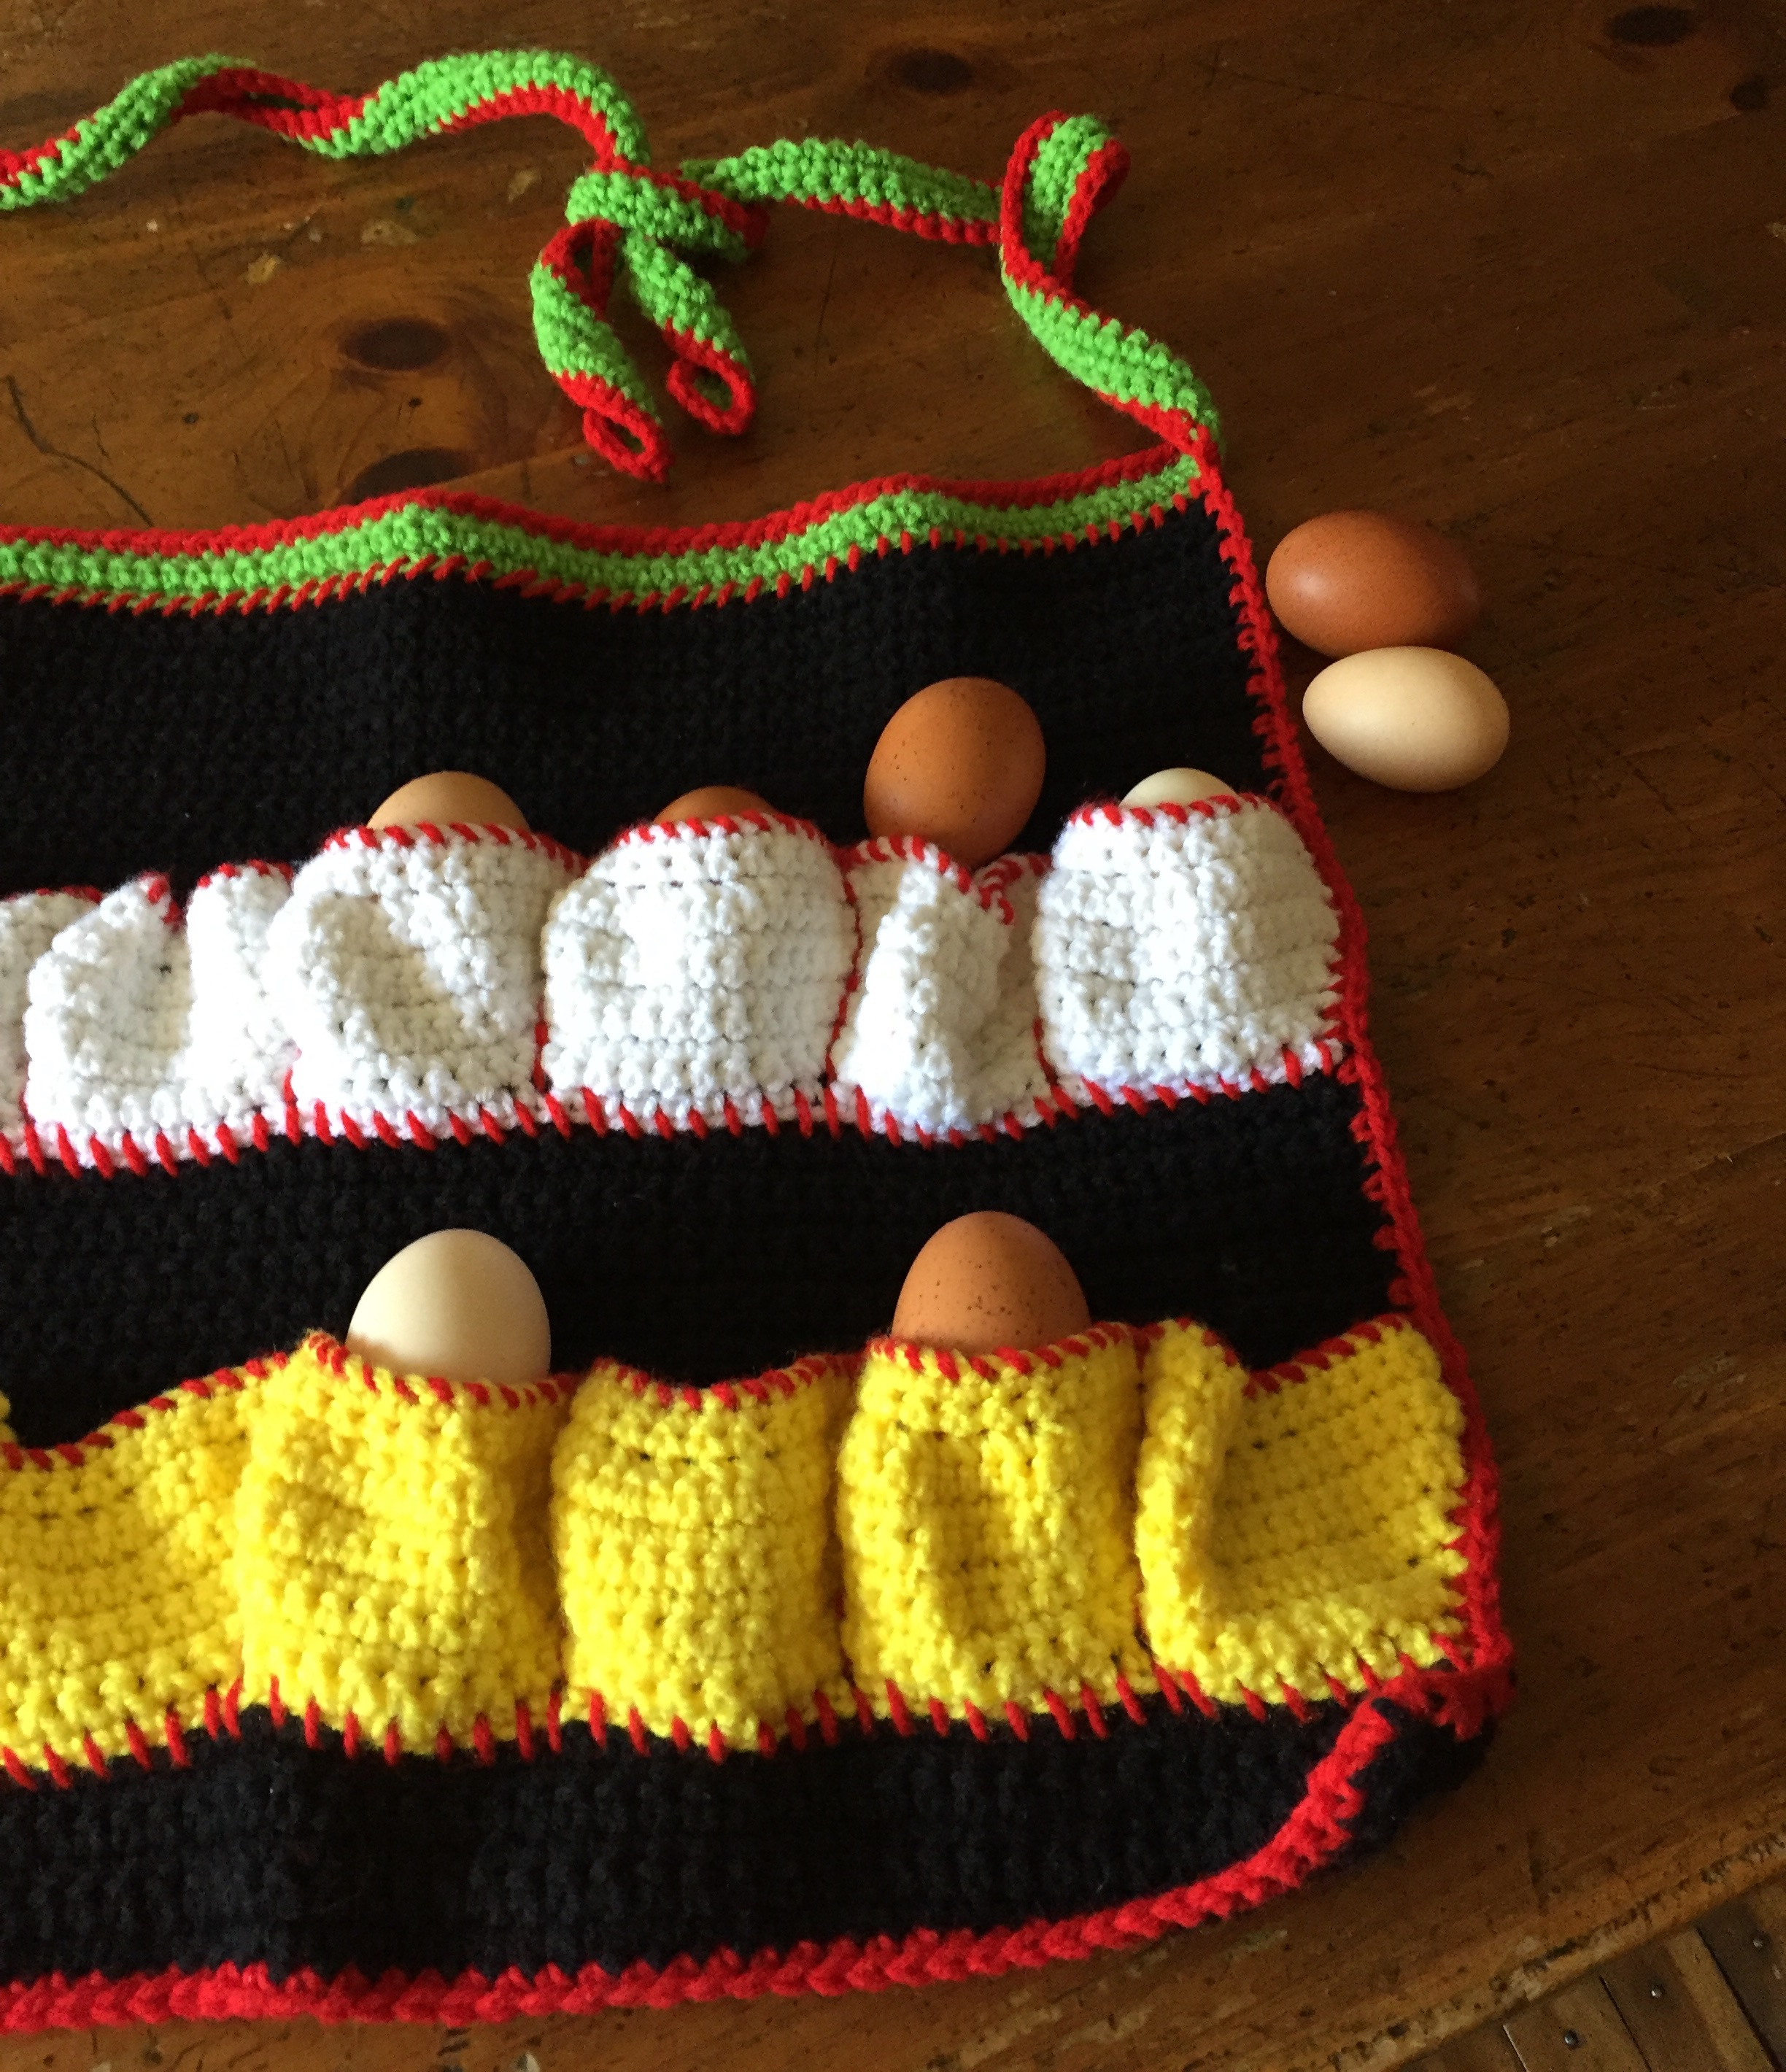 Knitted Hen Pattern Cheerful Crocheted Egg Gathering Apron A Review And A Deal